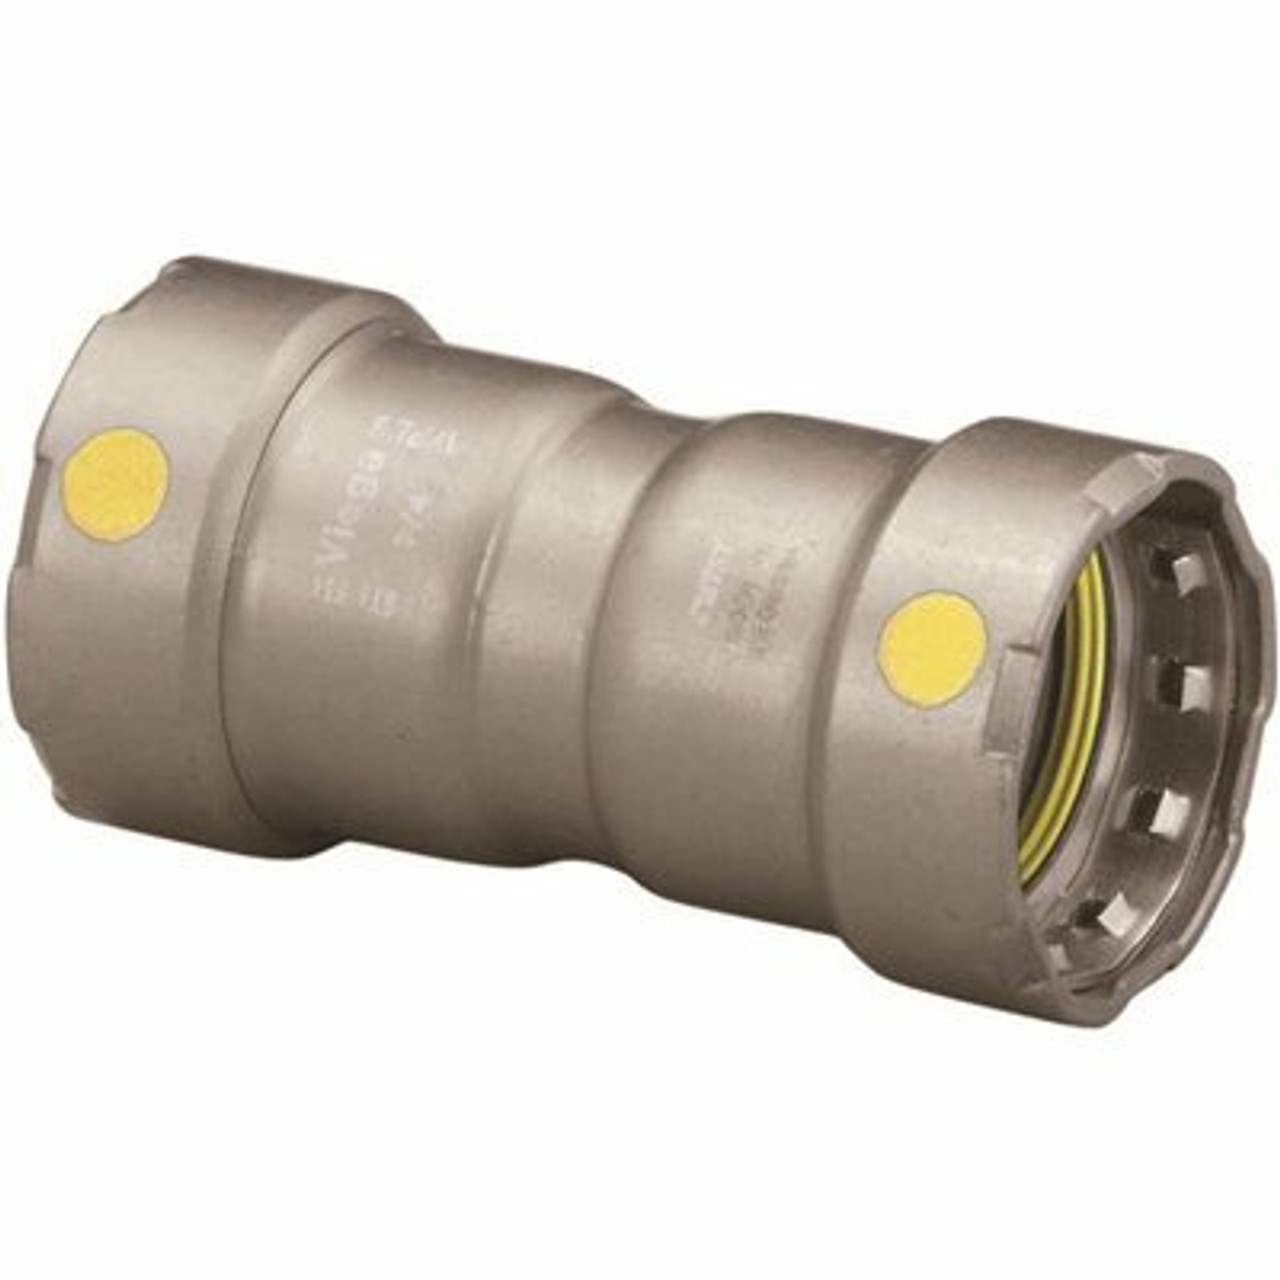 Viega 1-1/2 In. X 1-1/2 In. Carbon Steel Coupling With Stop